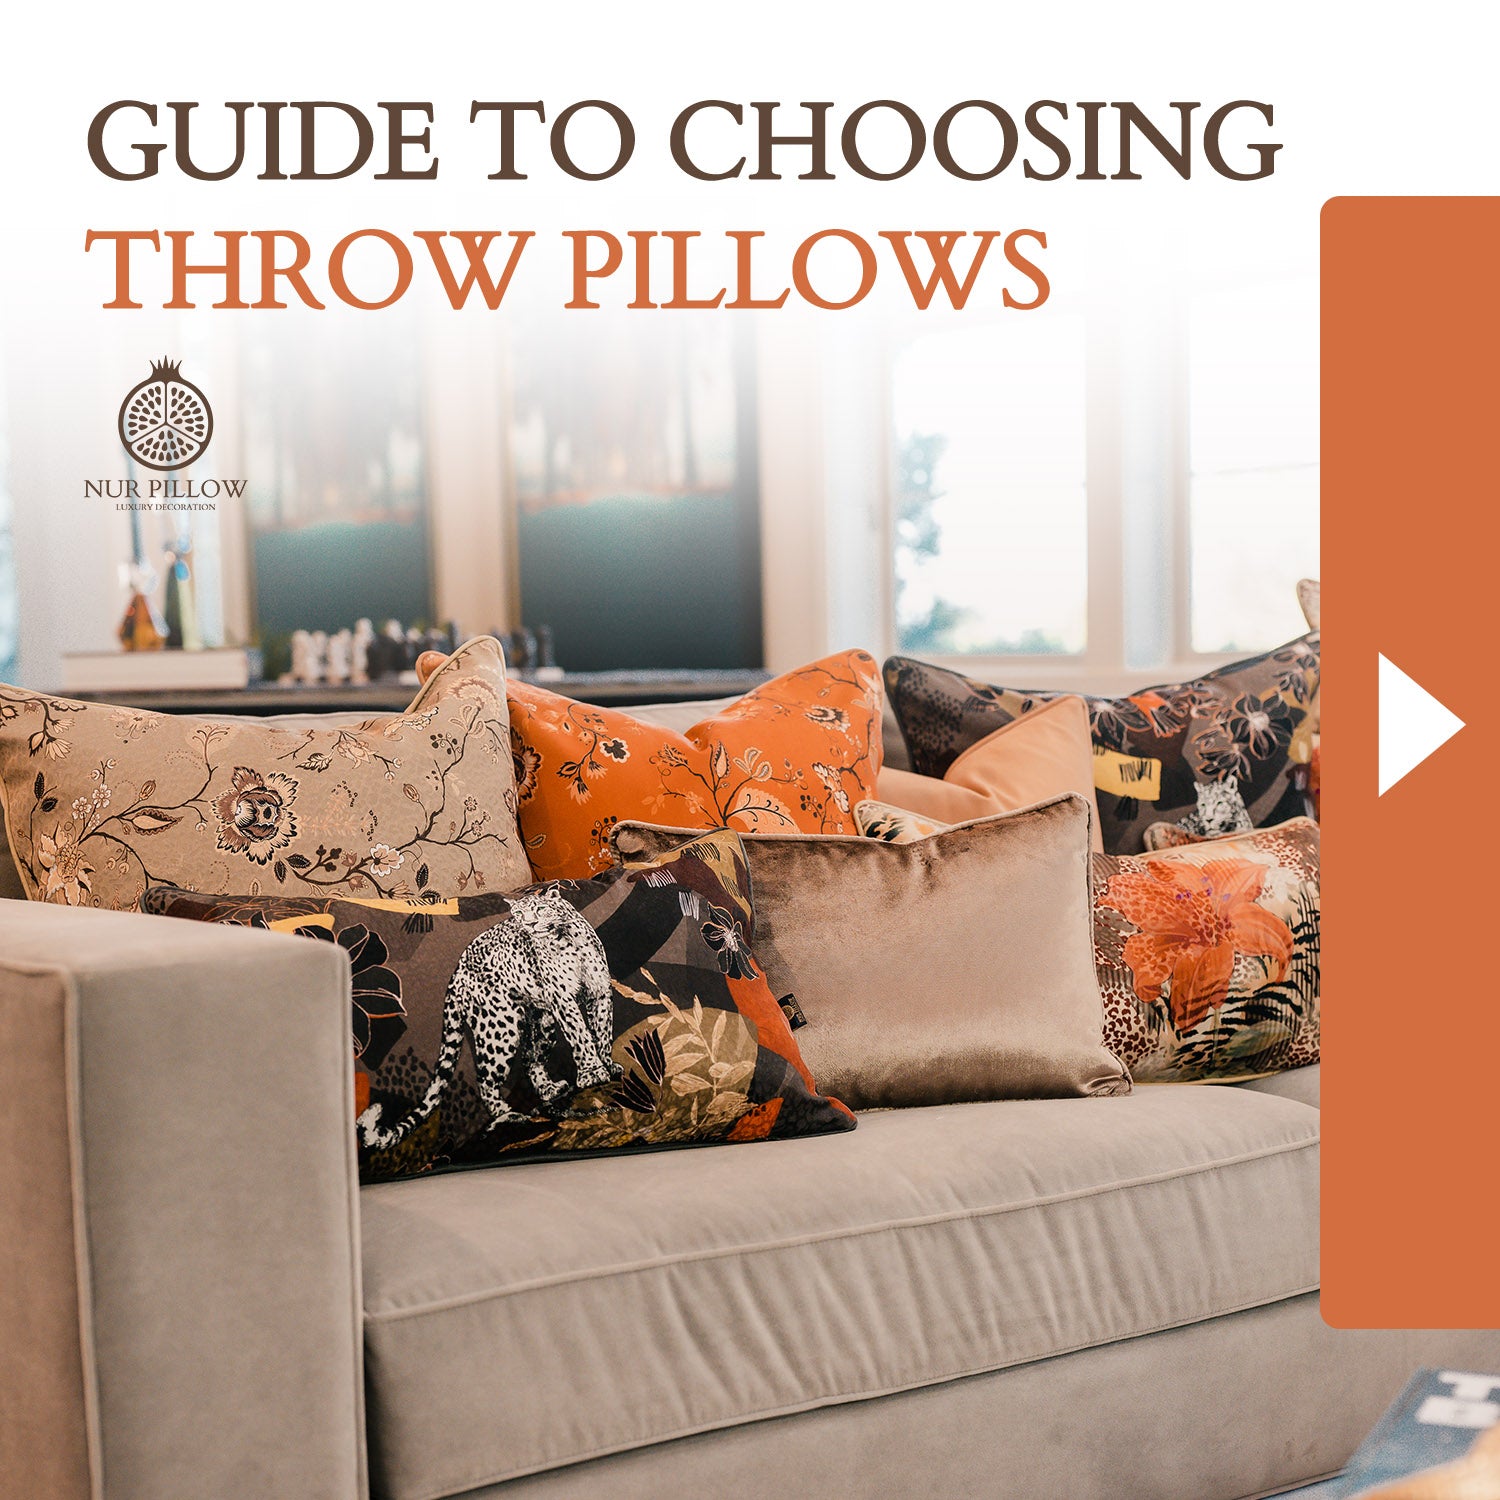 Guide to Choosing Throw Pillows - How to Decorate